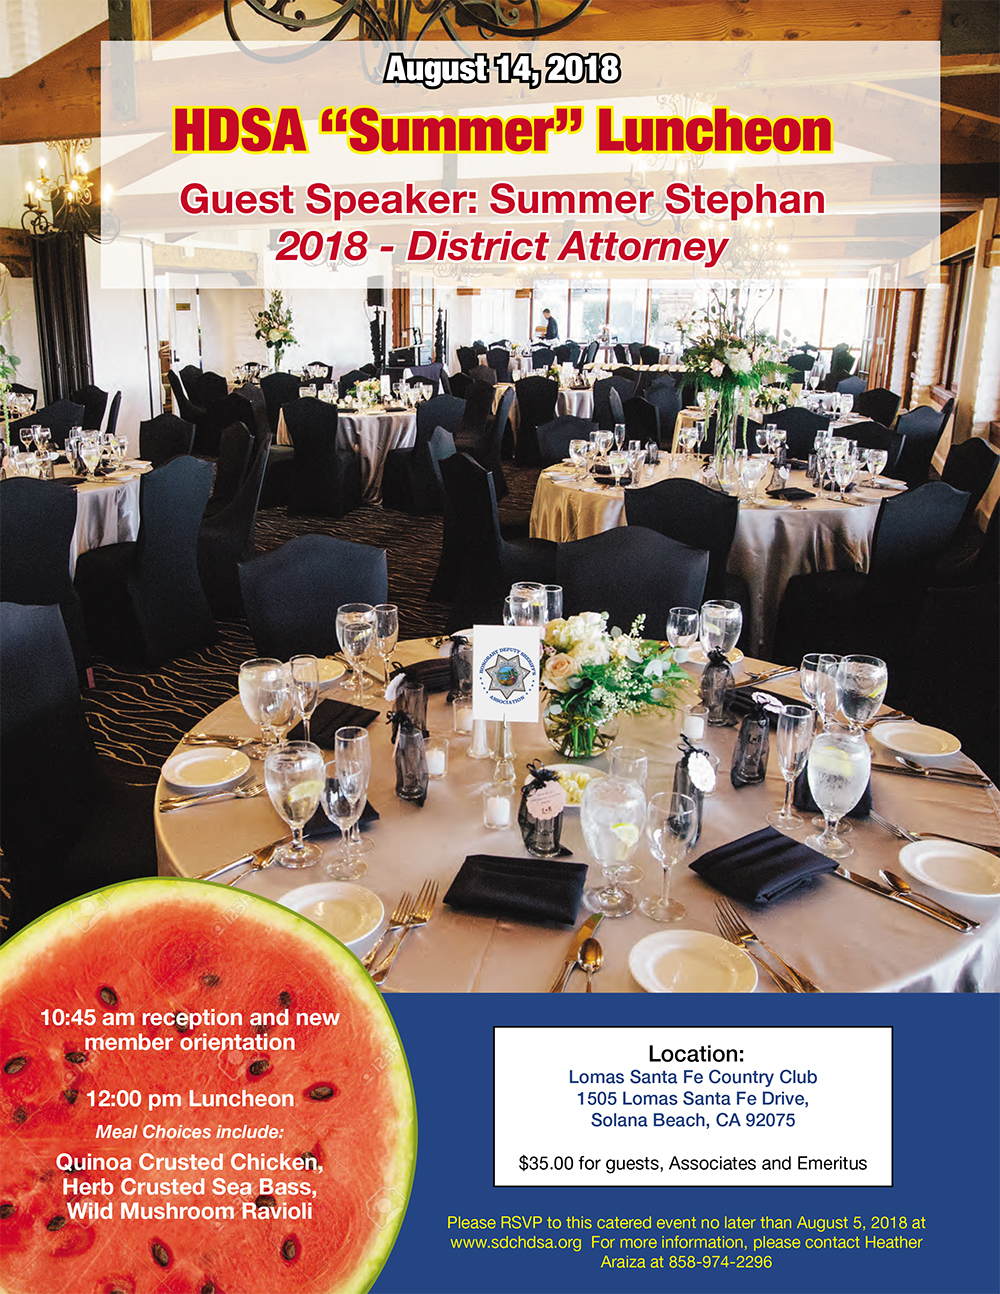 AUG 14 HDSA LUNCHEON 2018 District Attorney Summer Stephan